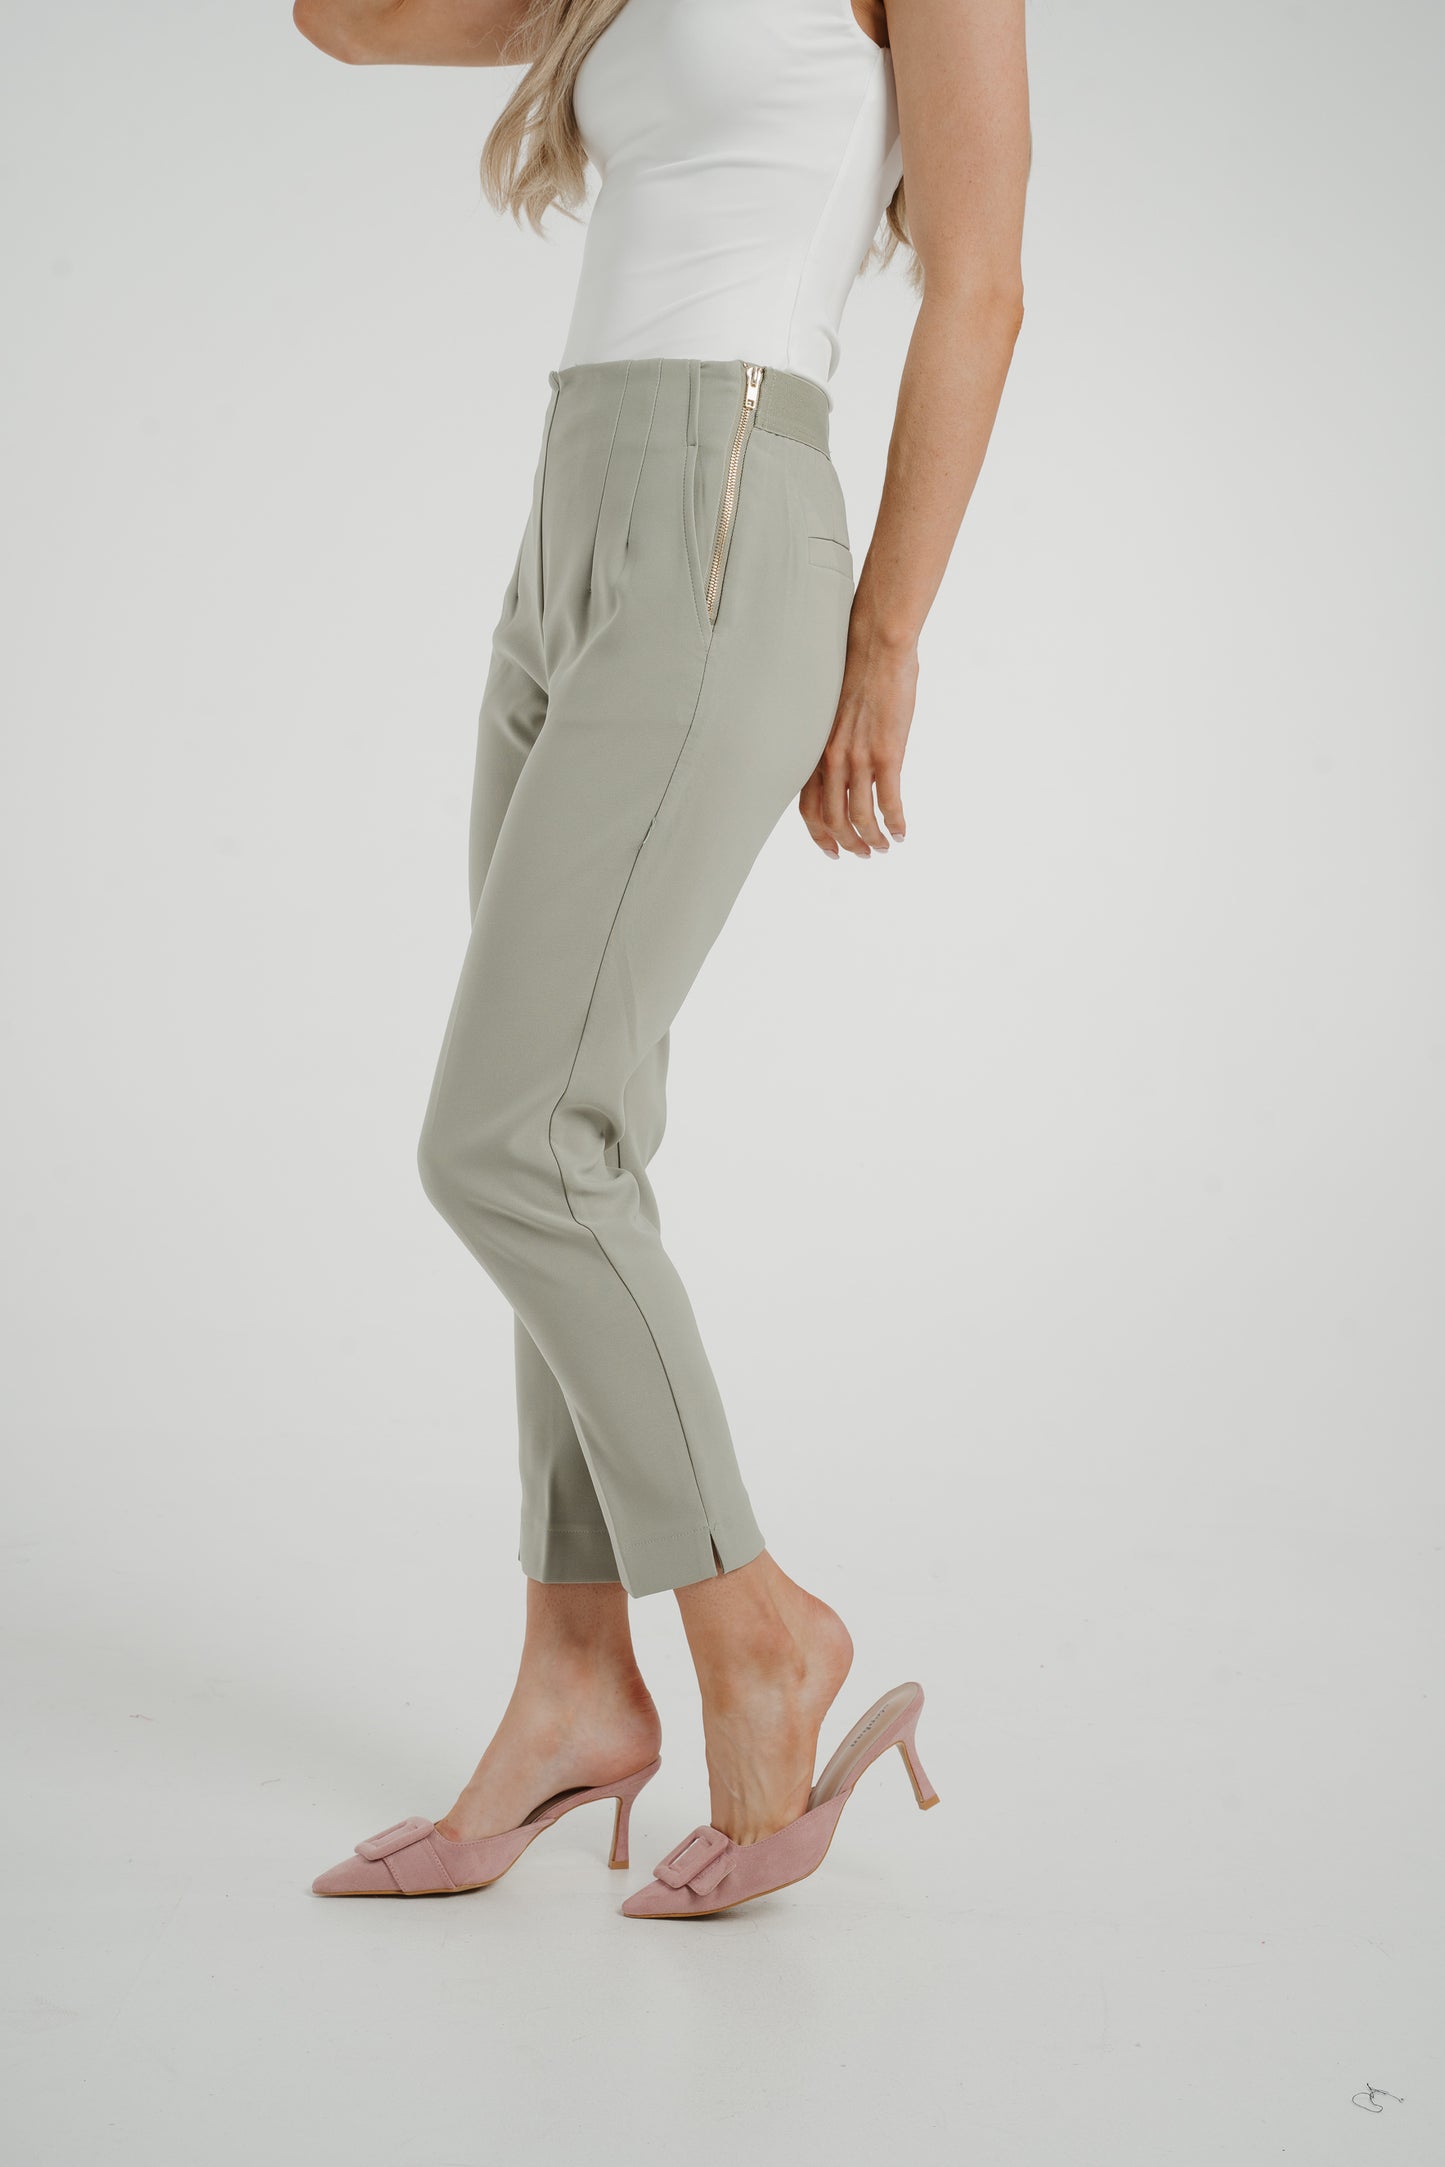 Freya Fitted Trouser In Sage